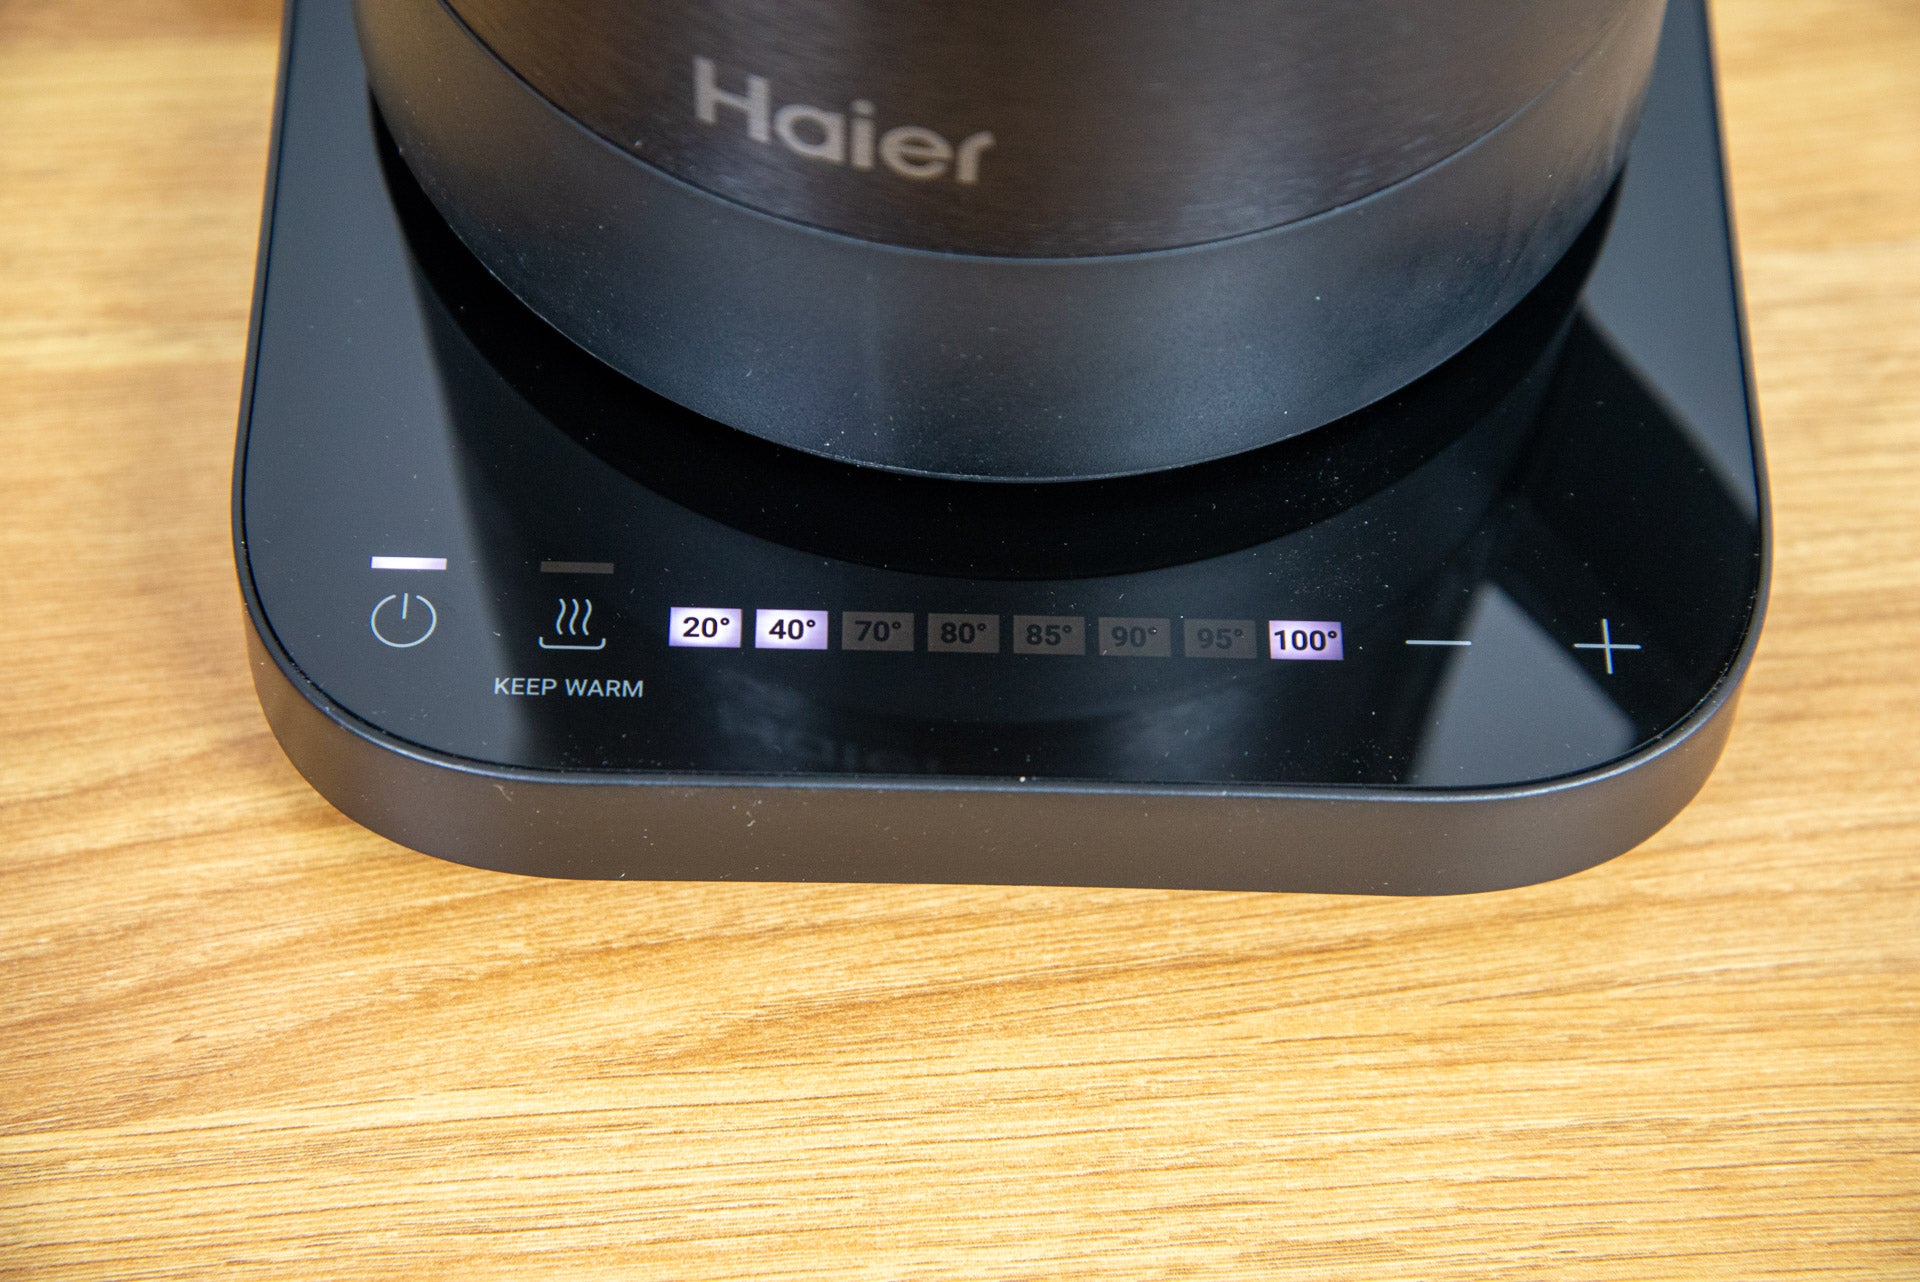 Haier Kettle I-Master Series 5 control panel